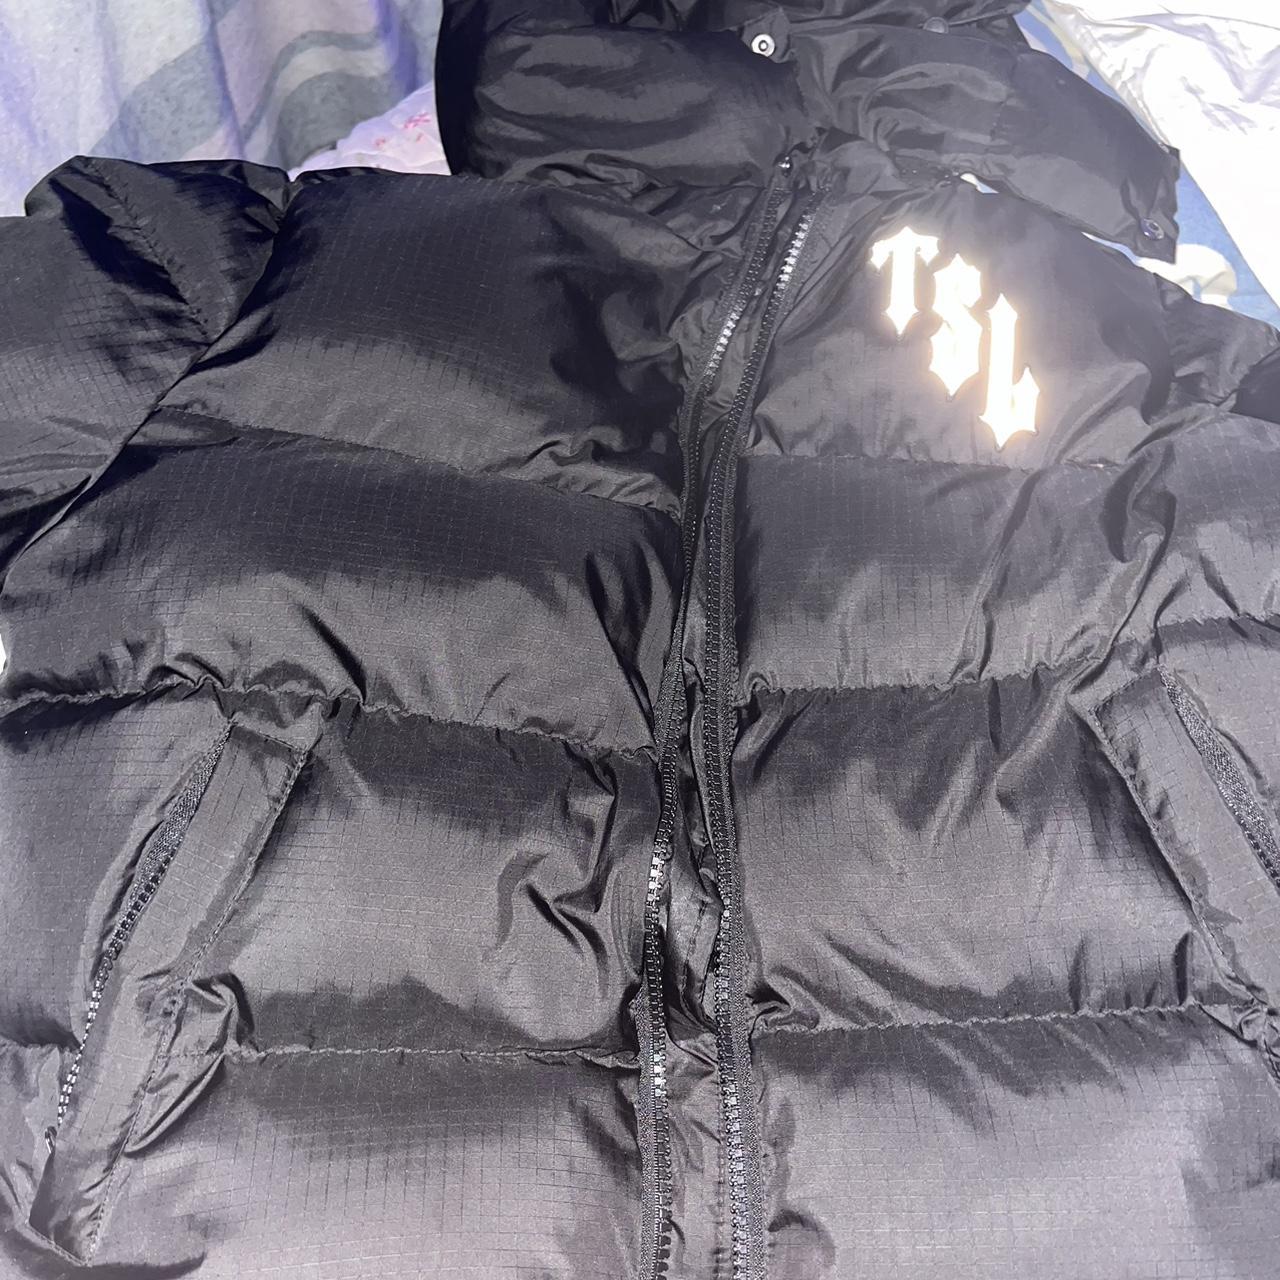 trap star shooters puffer jacket.size small with no... - Depop